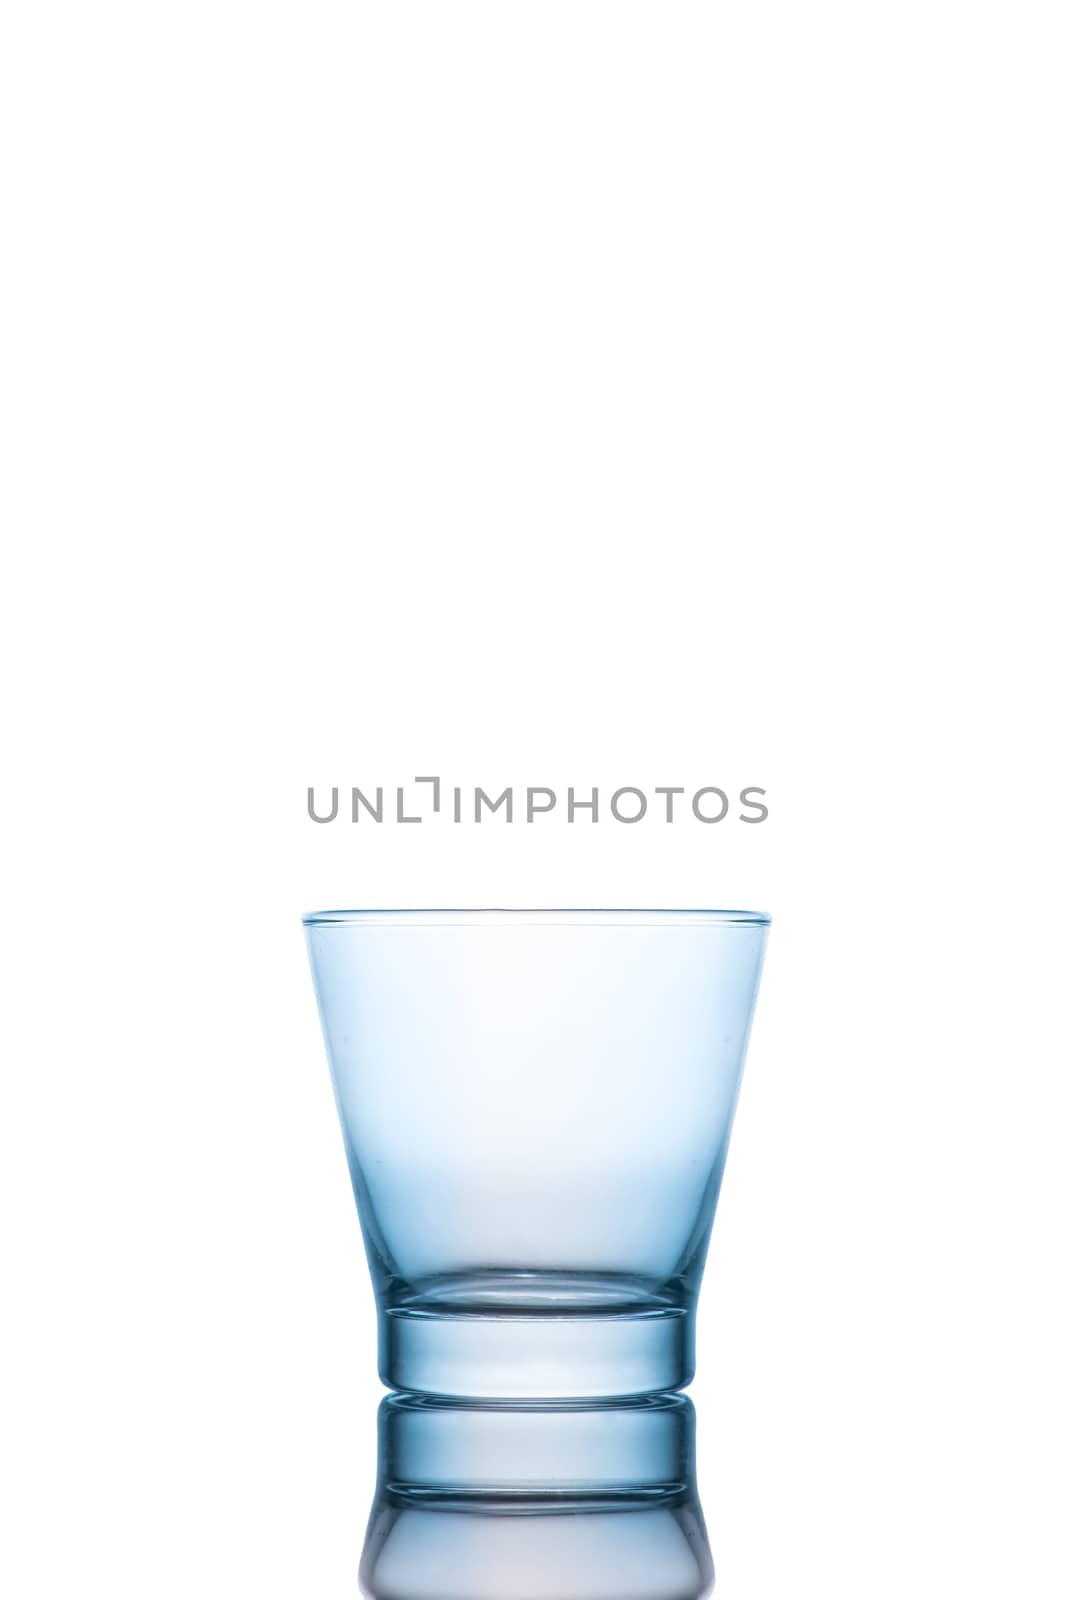 water glass isolated with clipping path included by makidotvn